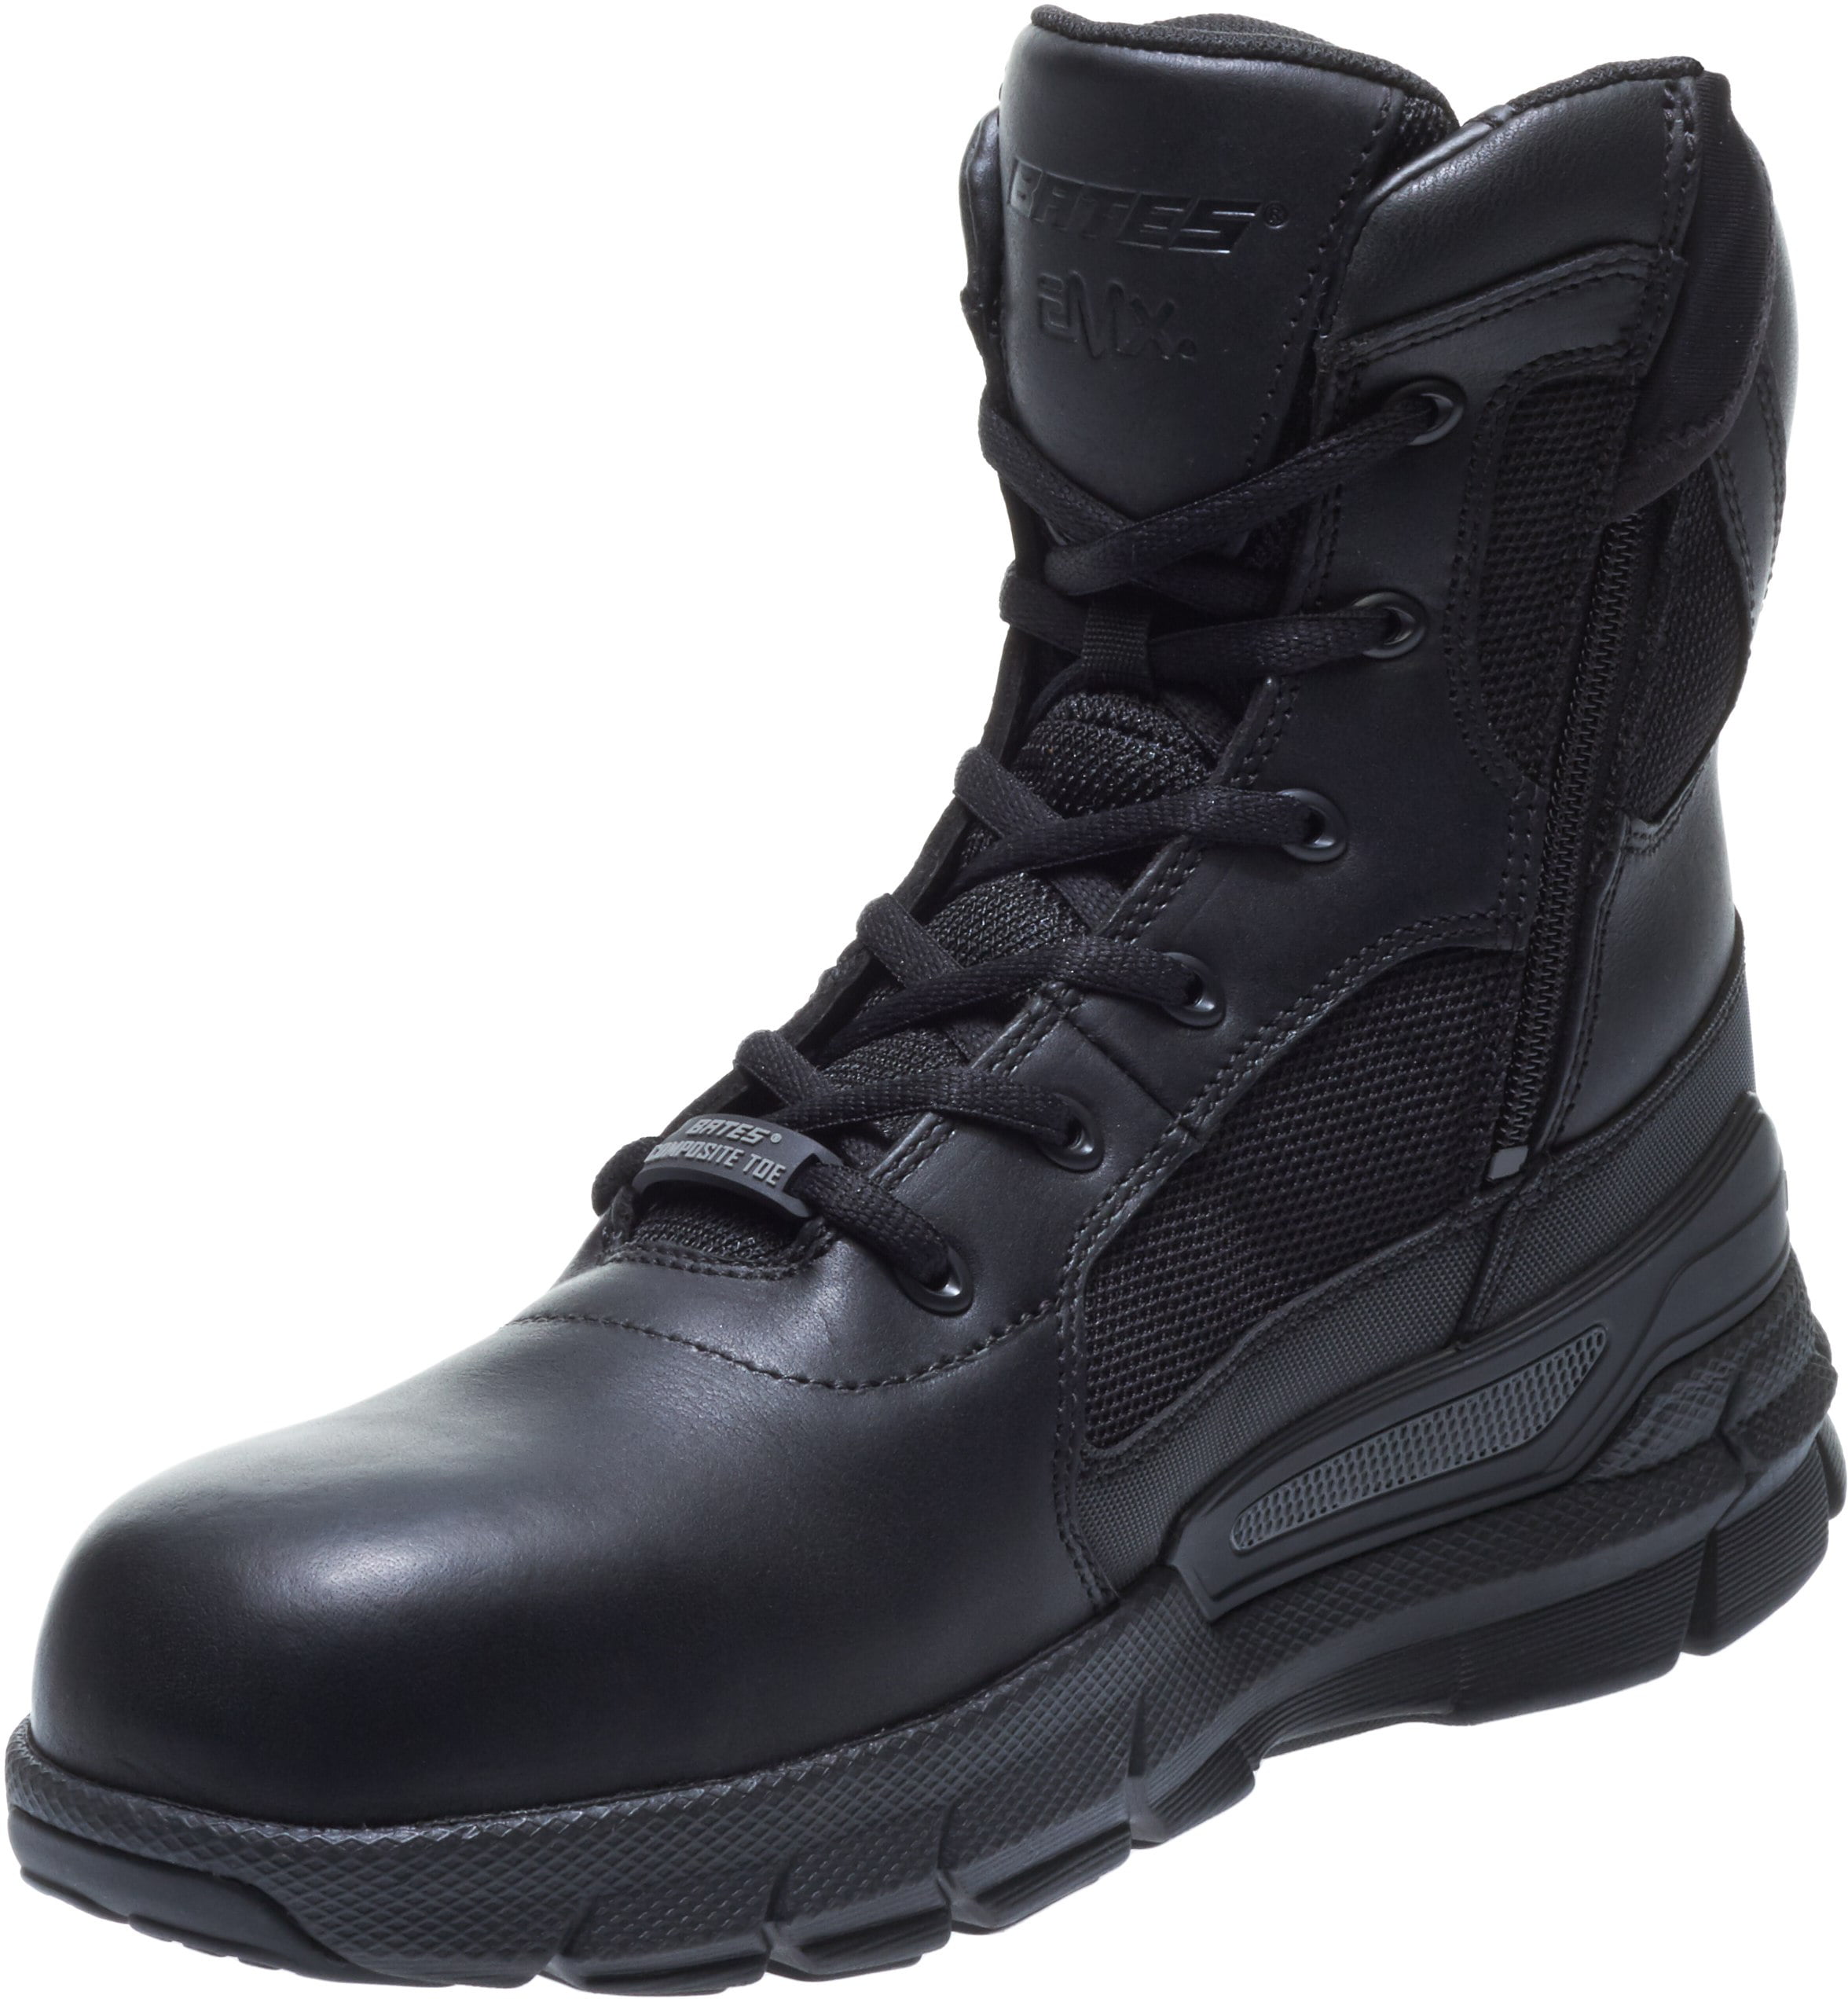 Bates Charge Composite Toe Side Zip Black Mens Leather Military Tactical Boots 